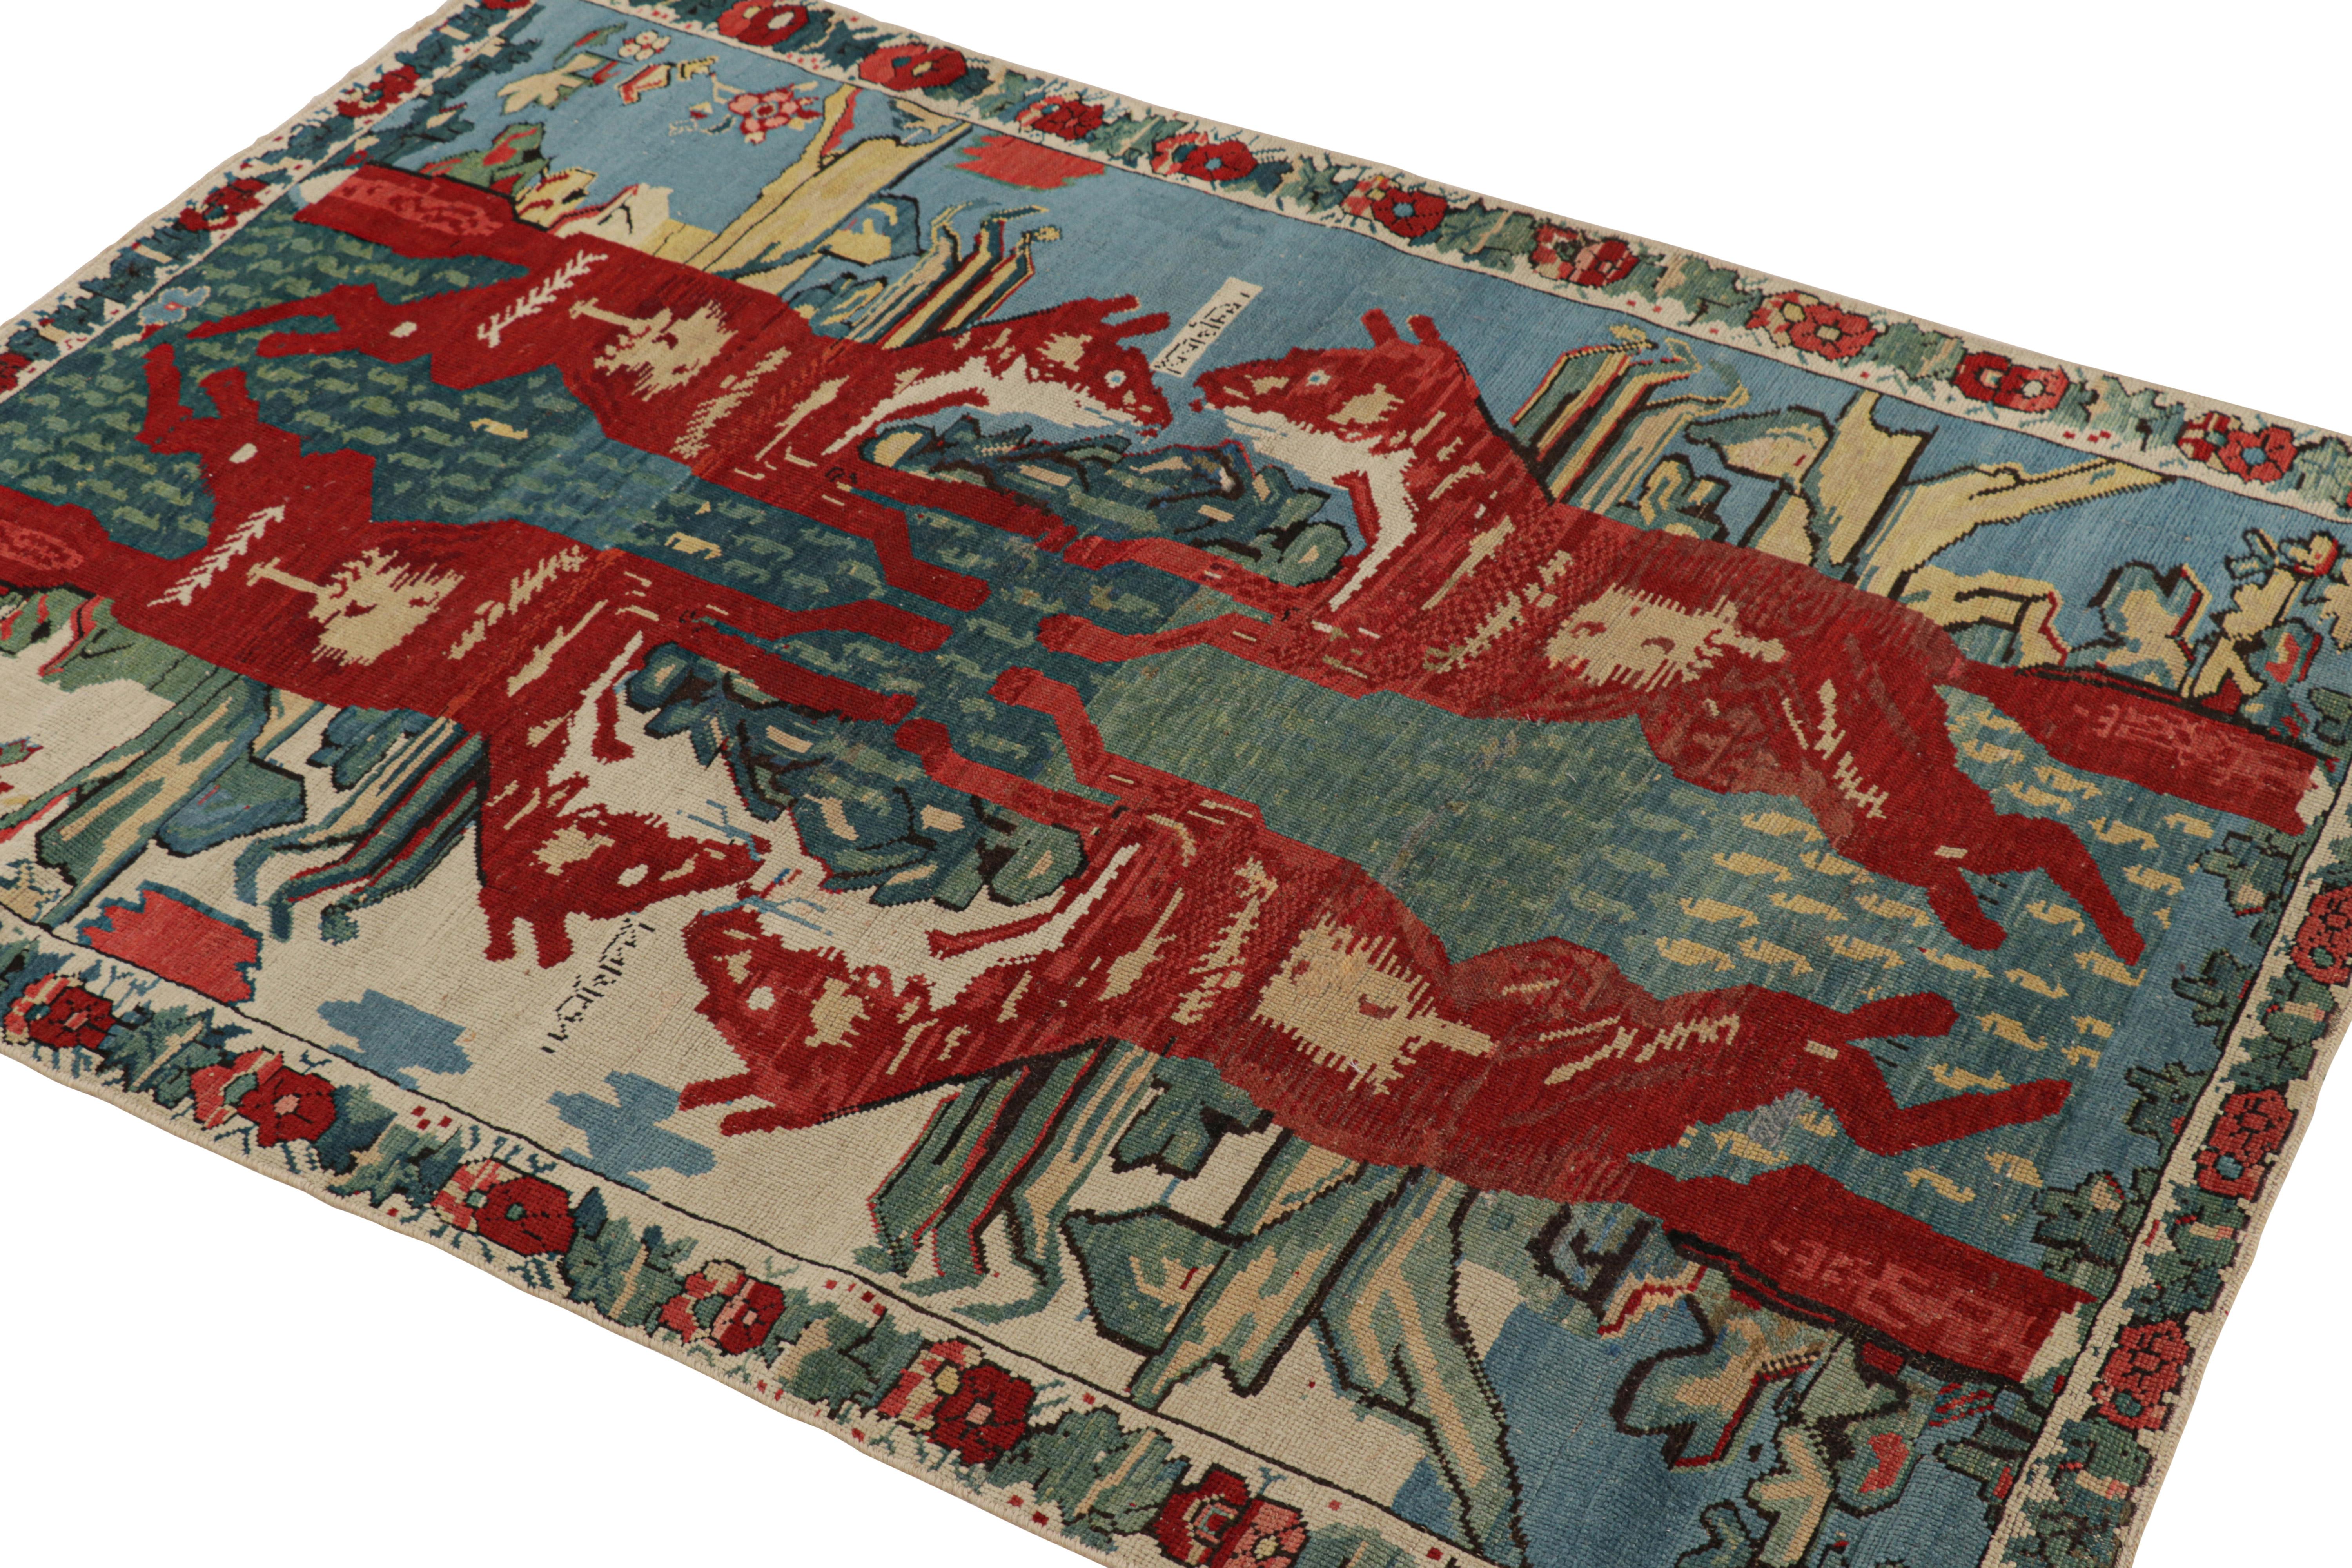 Russian Antique Seychour Rug with Fox Pictorials and Floral Patterns, from Rug & Kilim For Sale